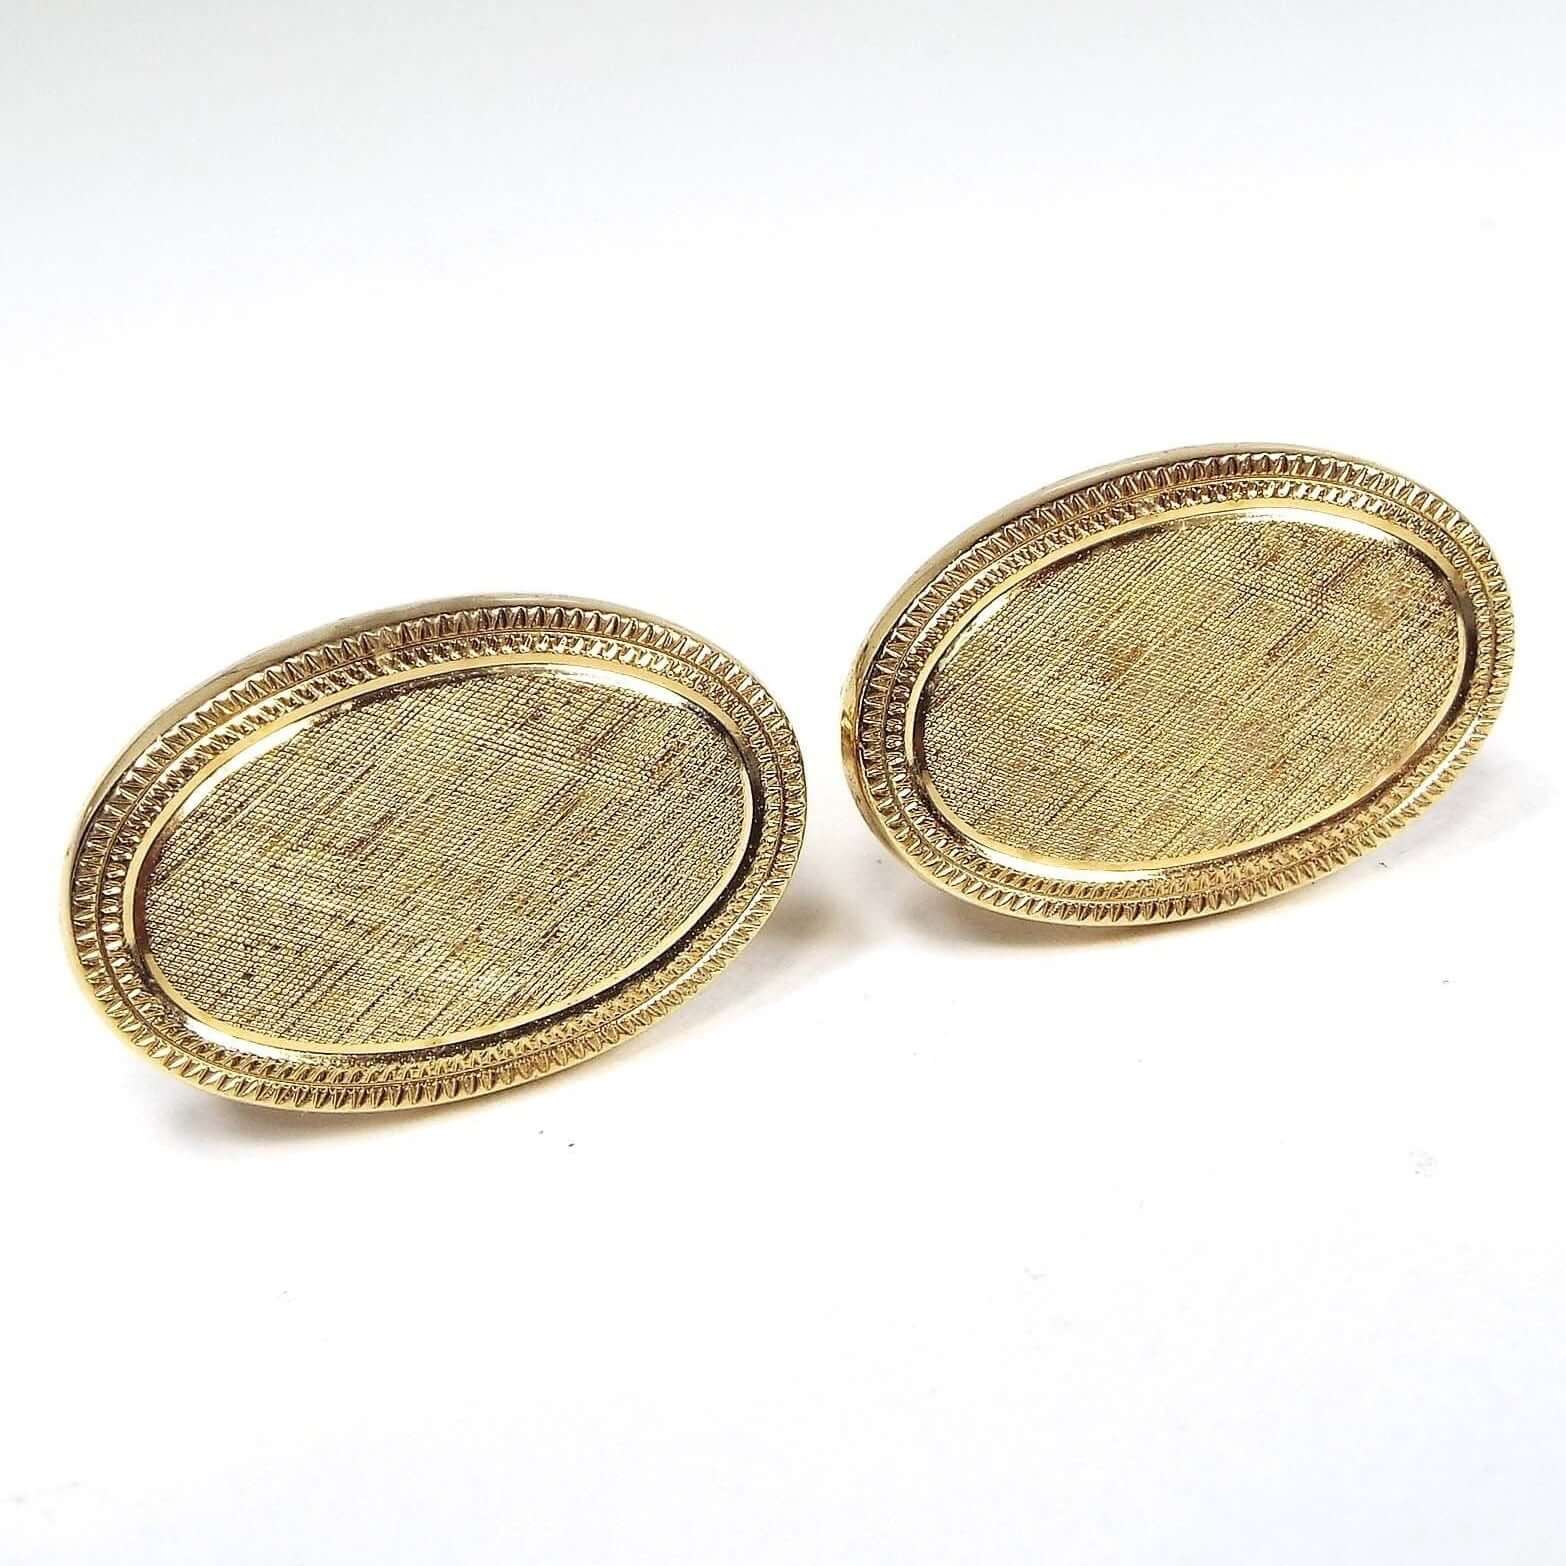 Front view of the retro 1970's Avon cufflinks.The metal is gold tone in color. They are oval in shape with brushed textured matte middle areas. The outer edge has has a slightly raised shiny gold tone edge and two rows of etched lines. 